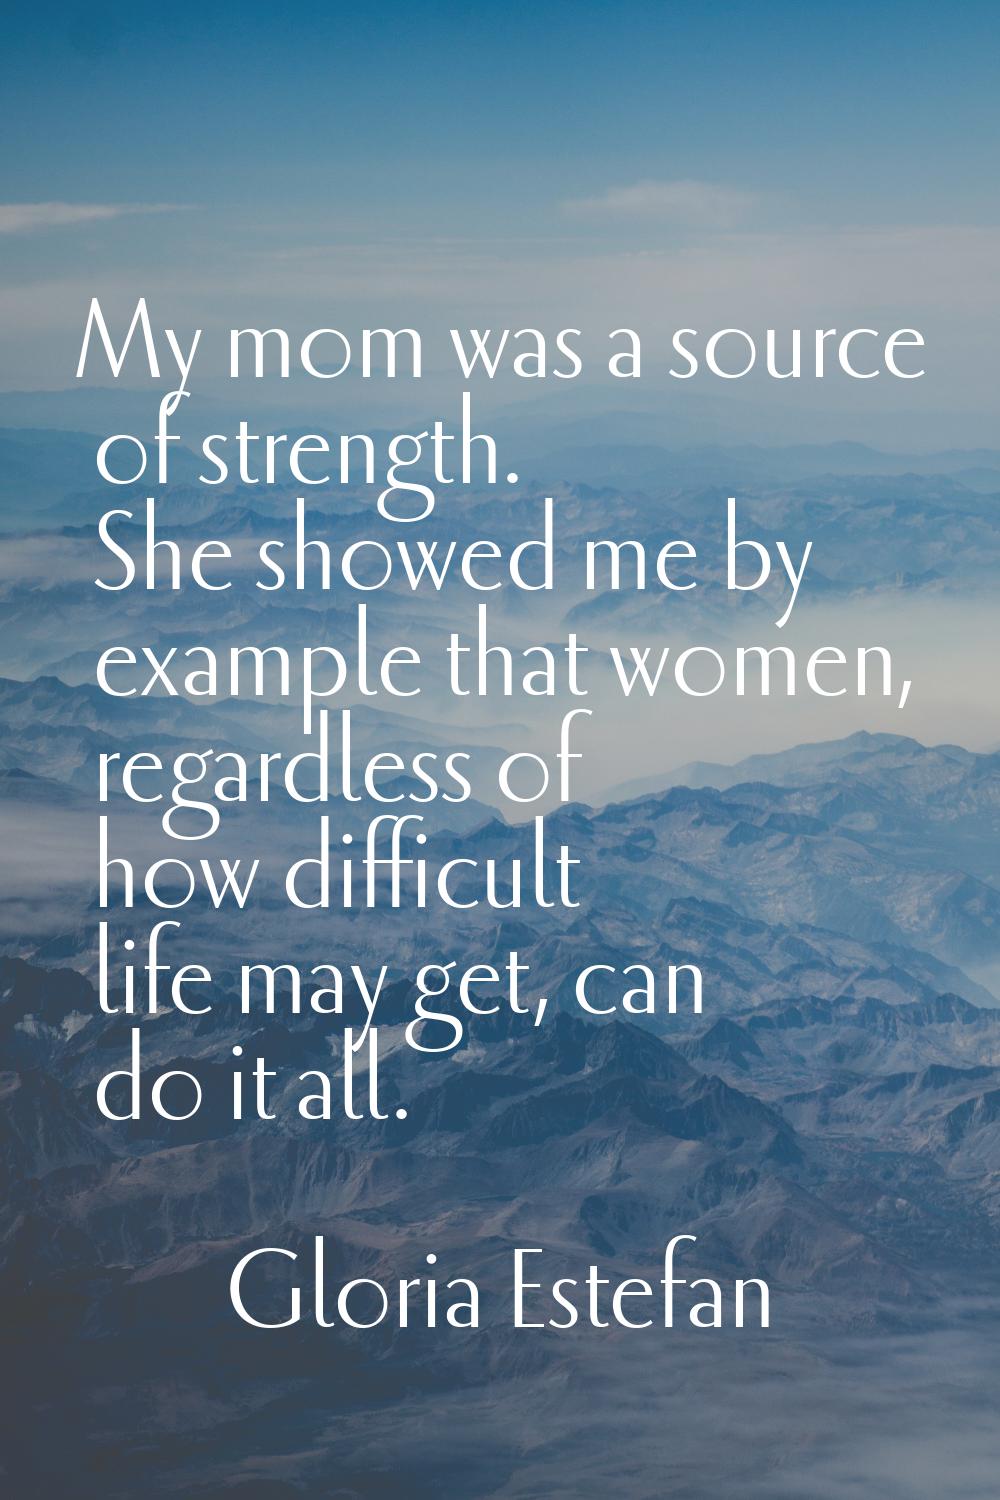 My mom was a source of strength. She showed me by example that women, regardless of how difficult l